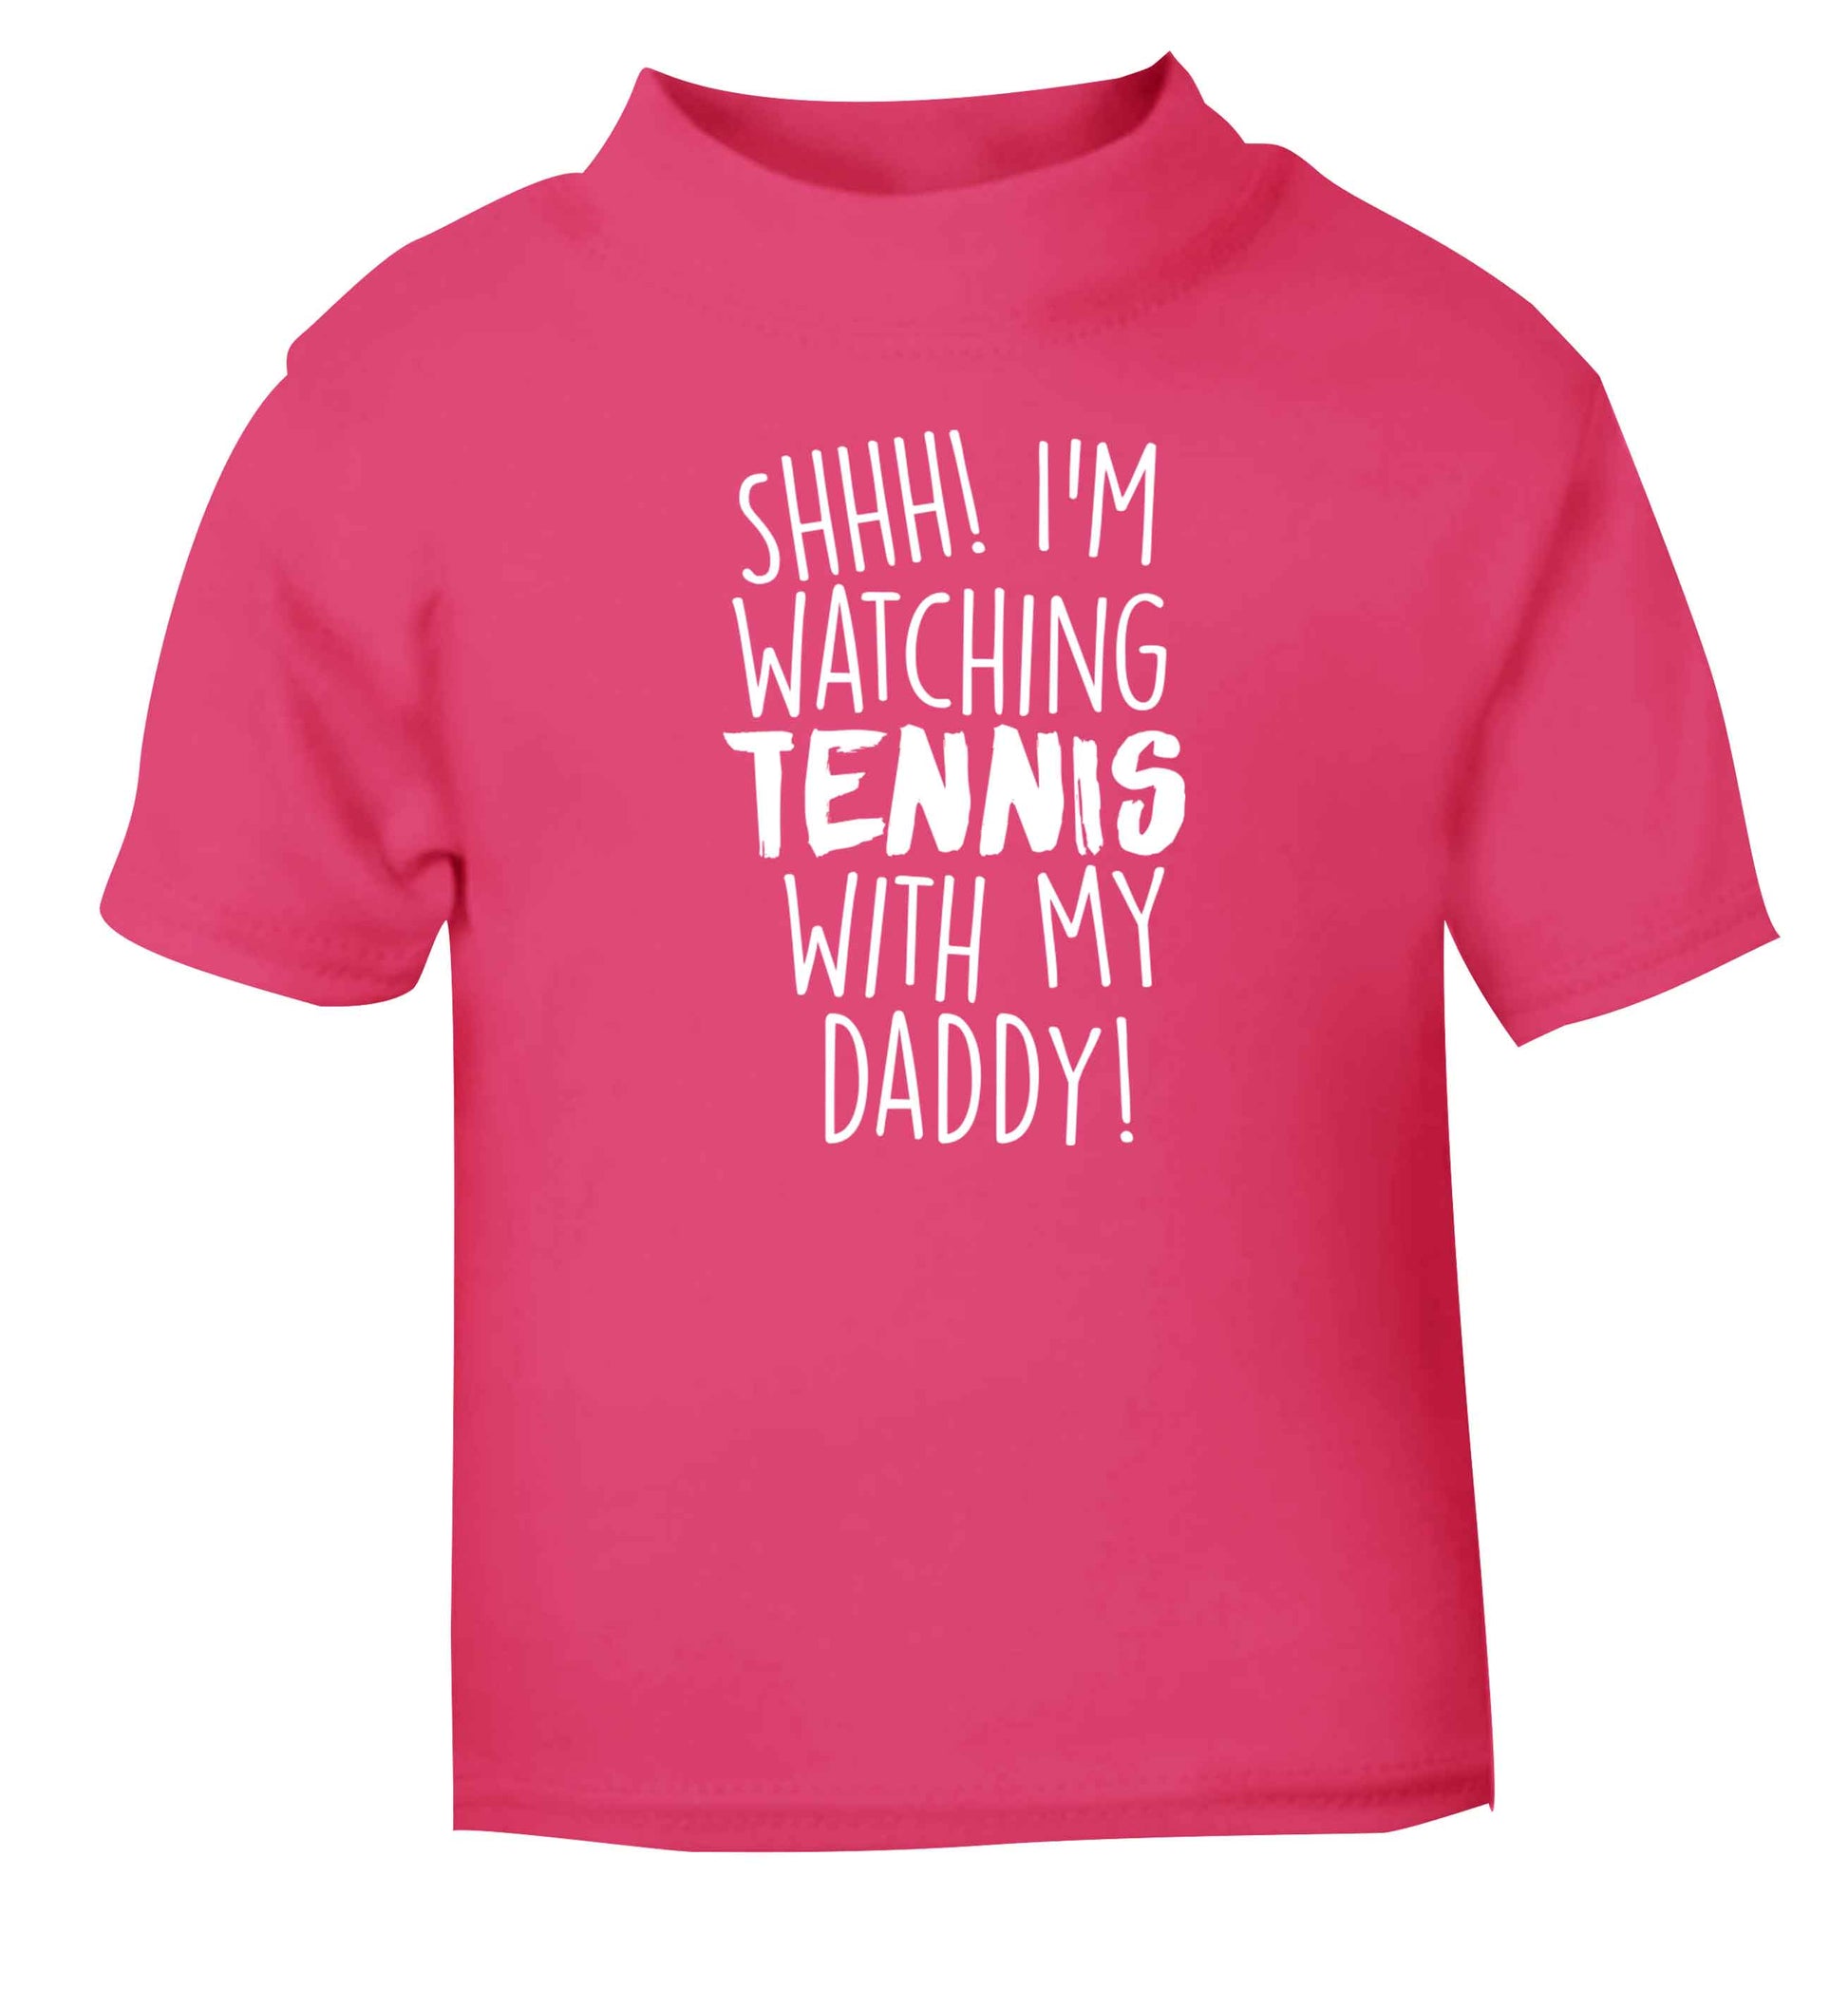 Shh! I'm watching tennis with my daddy! pink Baby Toddler Tshirt 2 Years